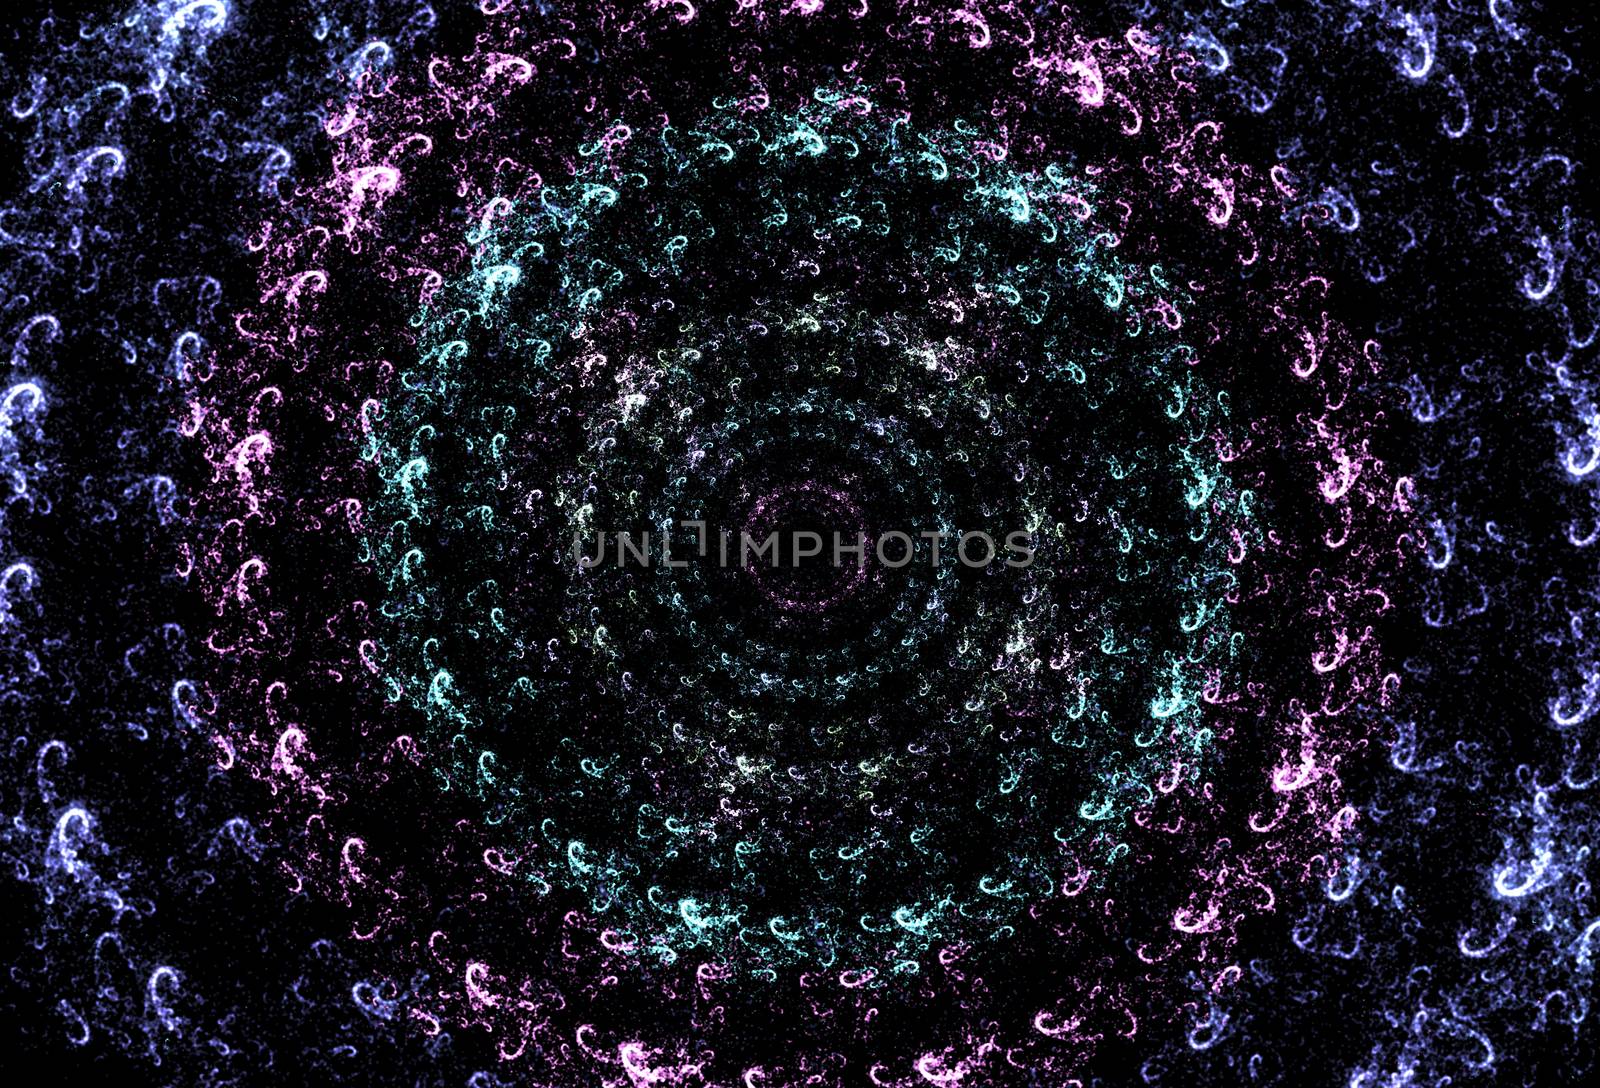 Digital Art: Fractal Graphics: The Time Tunnel / Space Rings / Galaxy Portal. Fantastic Wallpaper / Background / Scene Design. Sci-Fi / Abstract Style.